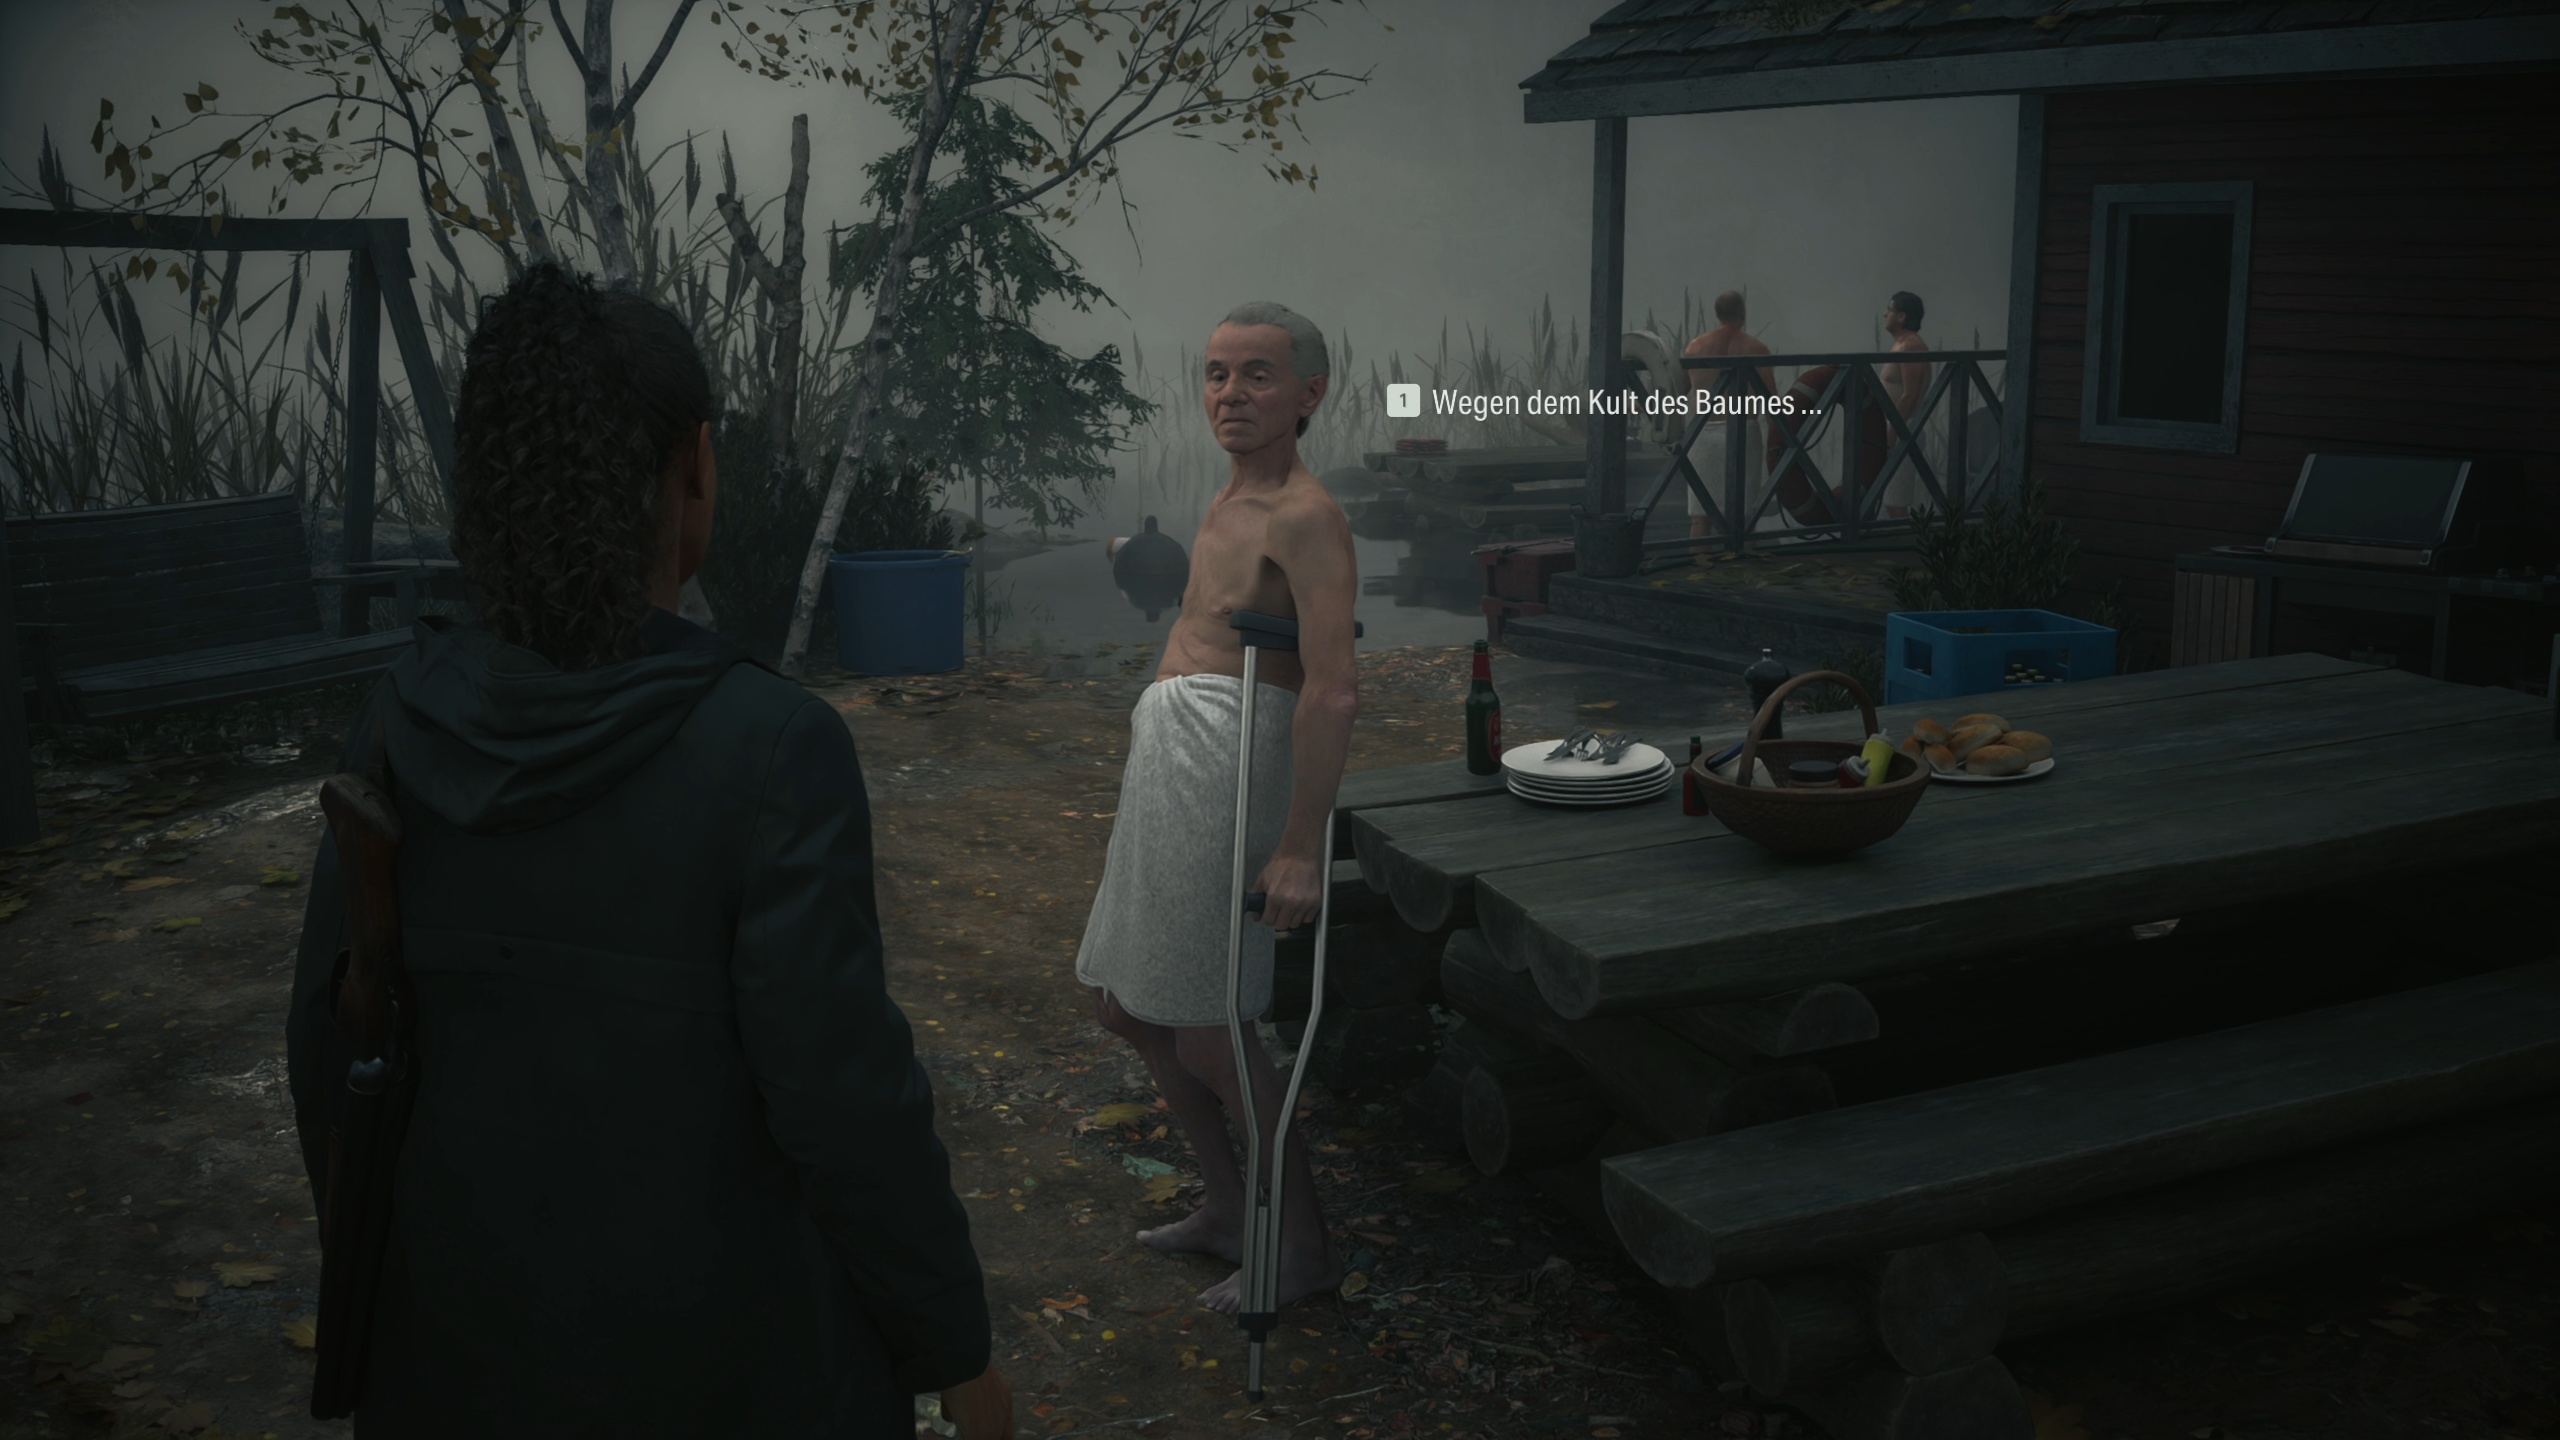 (No, the half-naked grandpa is nowhere near the biggest scare in Alan Wake 2! By the way, we learn more about the people and the world through dialogue.)